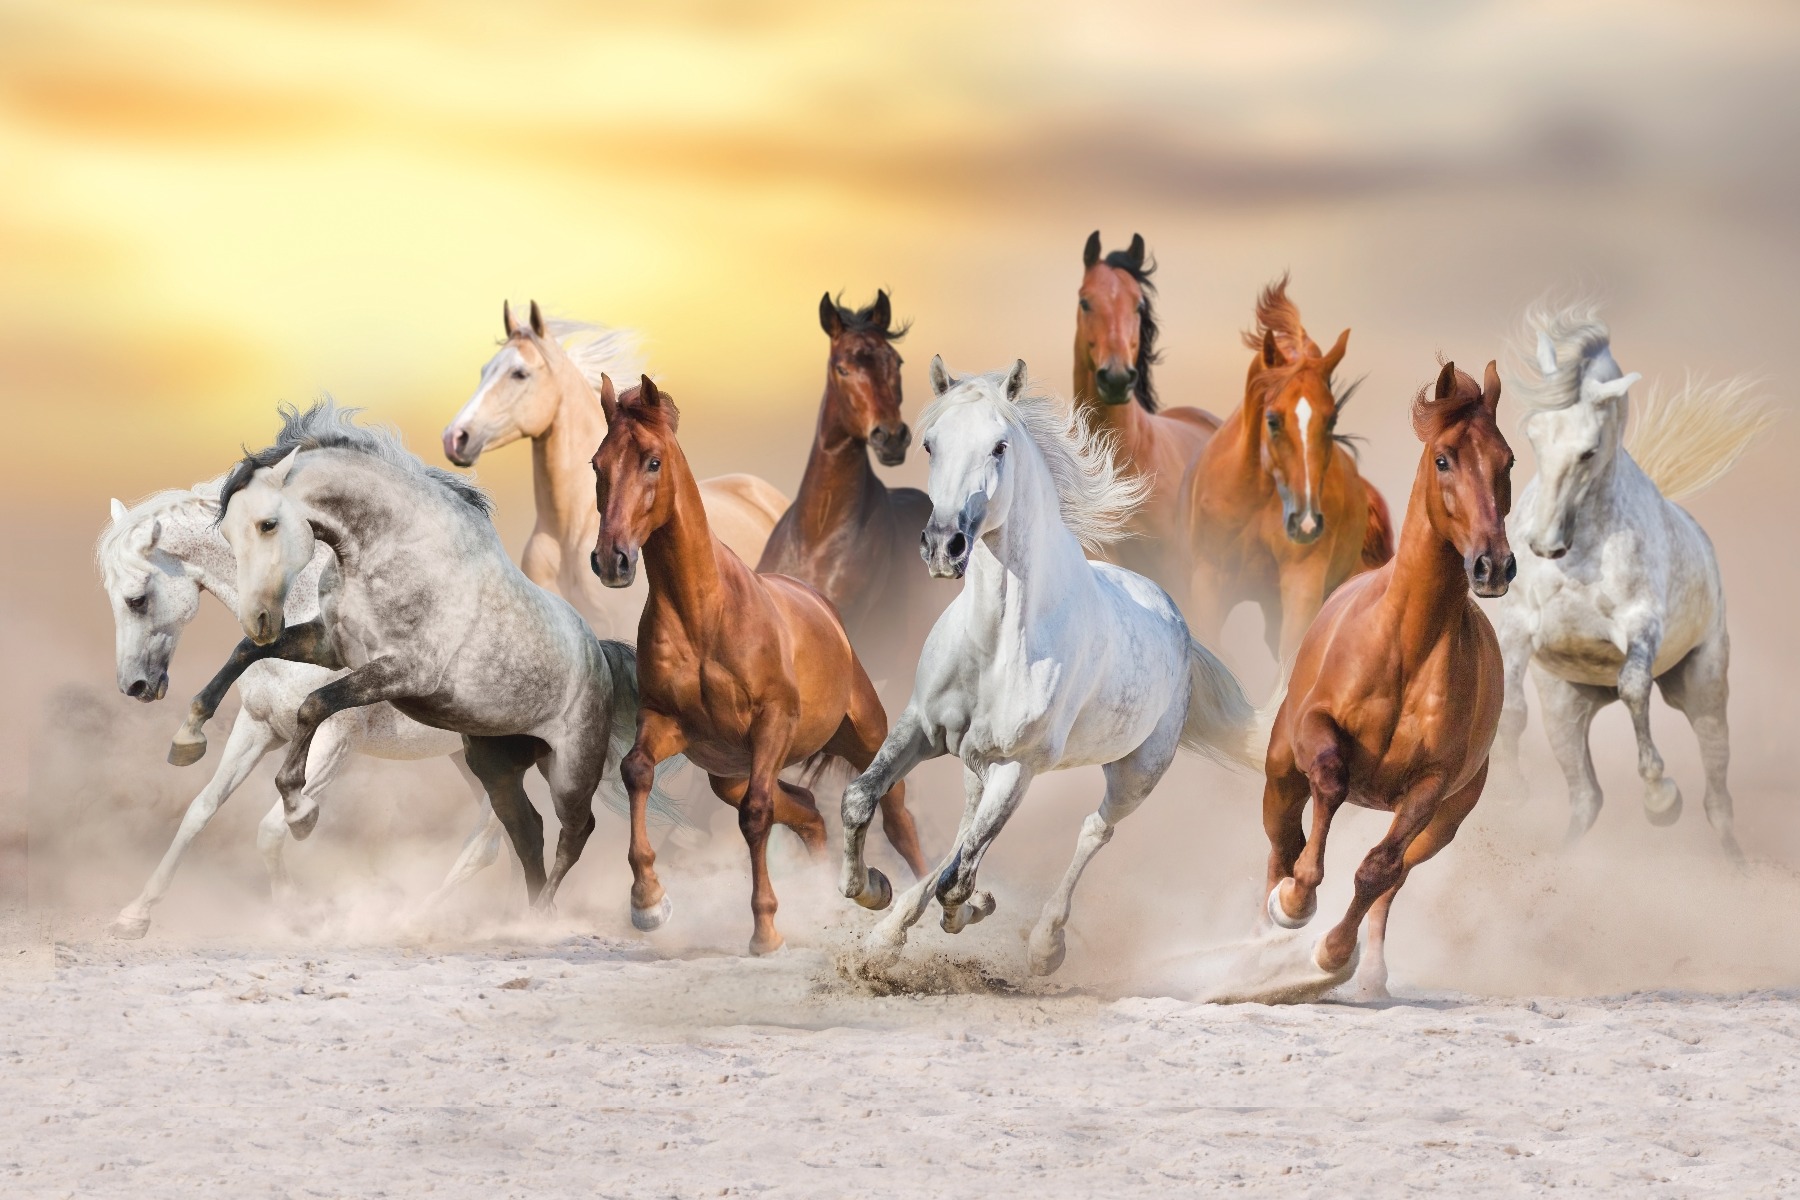 Top 999+ Seven Horses Wallpaper Full HD, 4K✓Free to Use